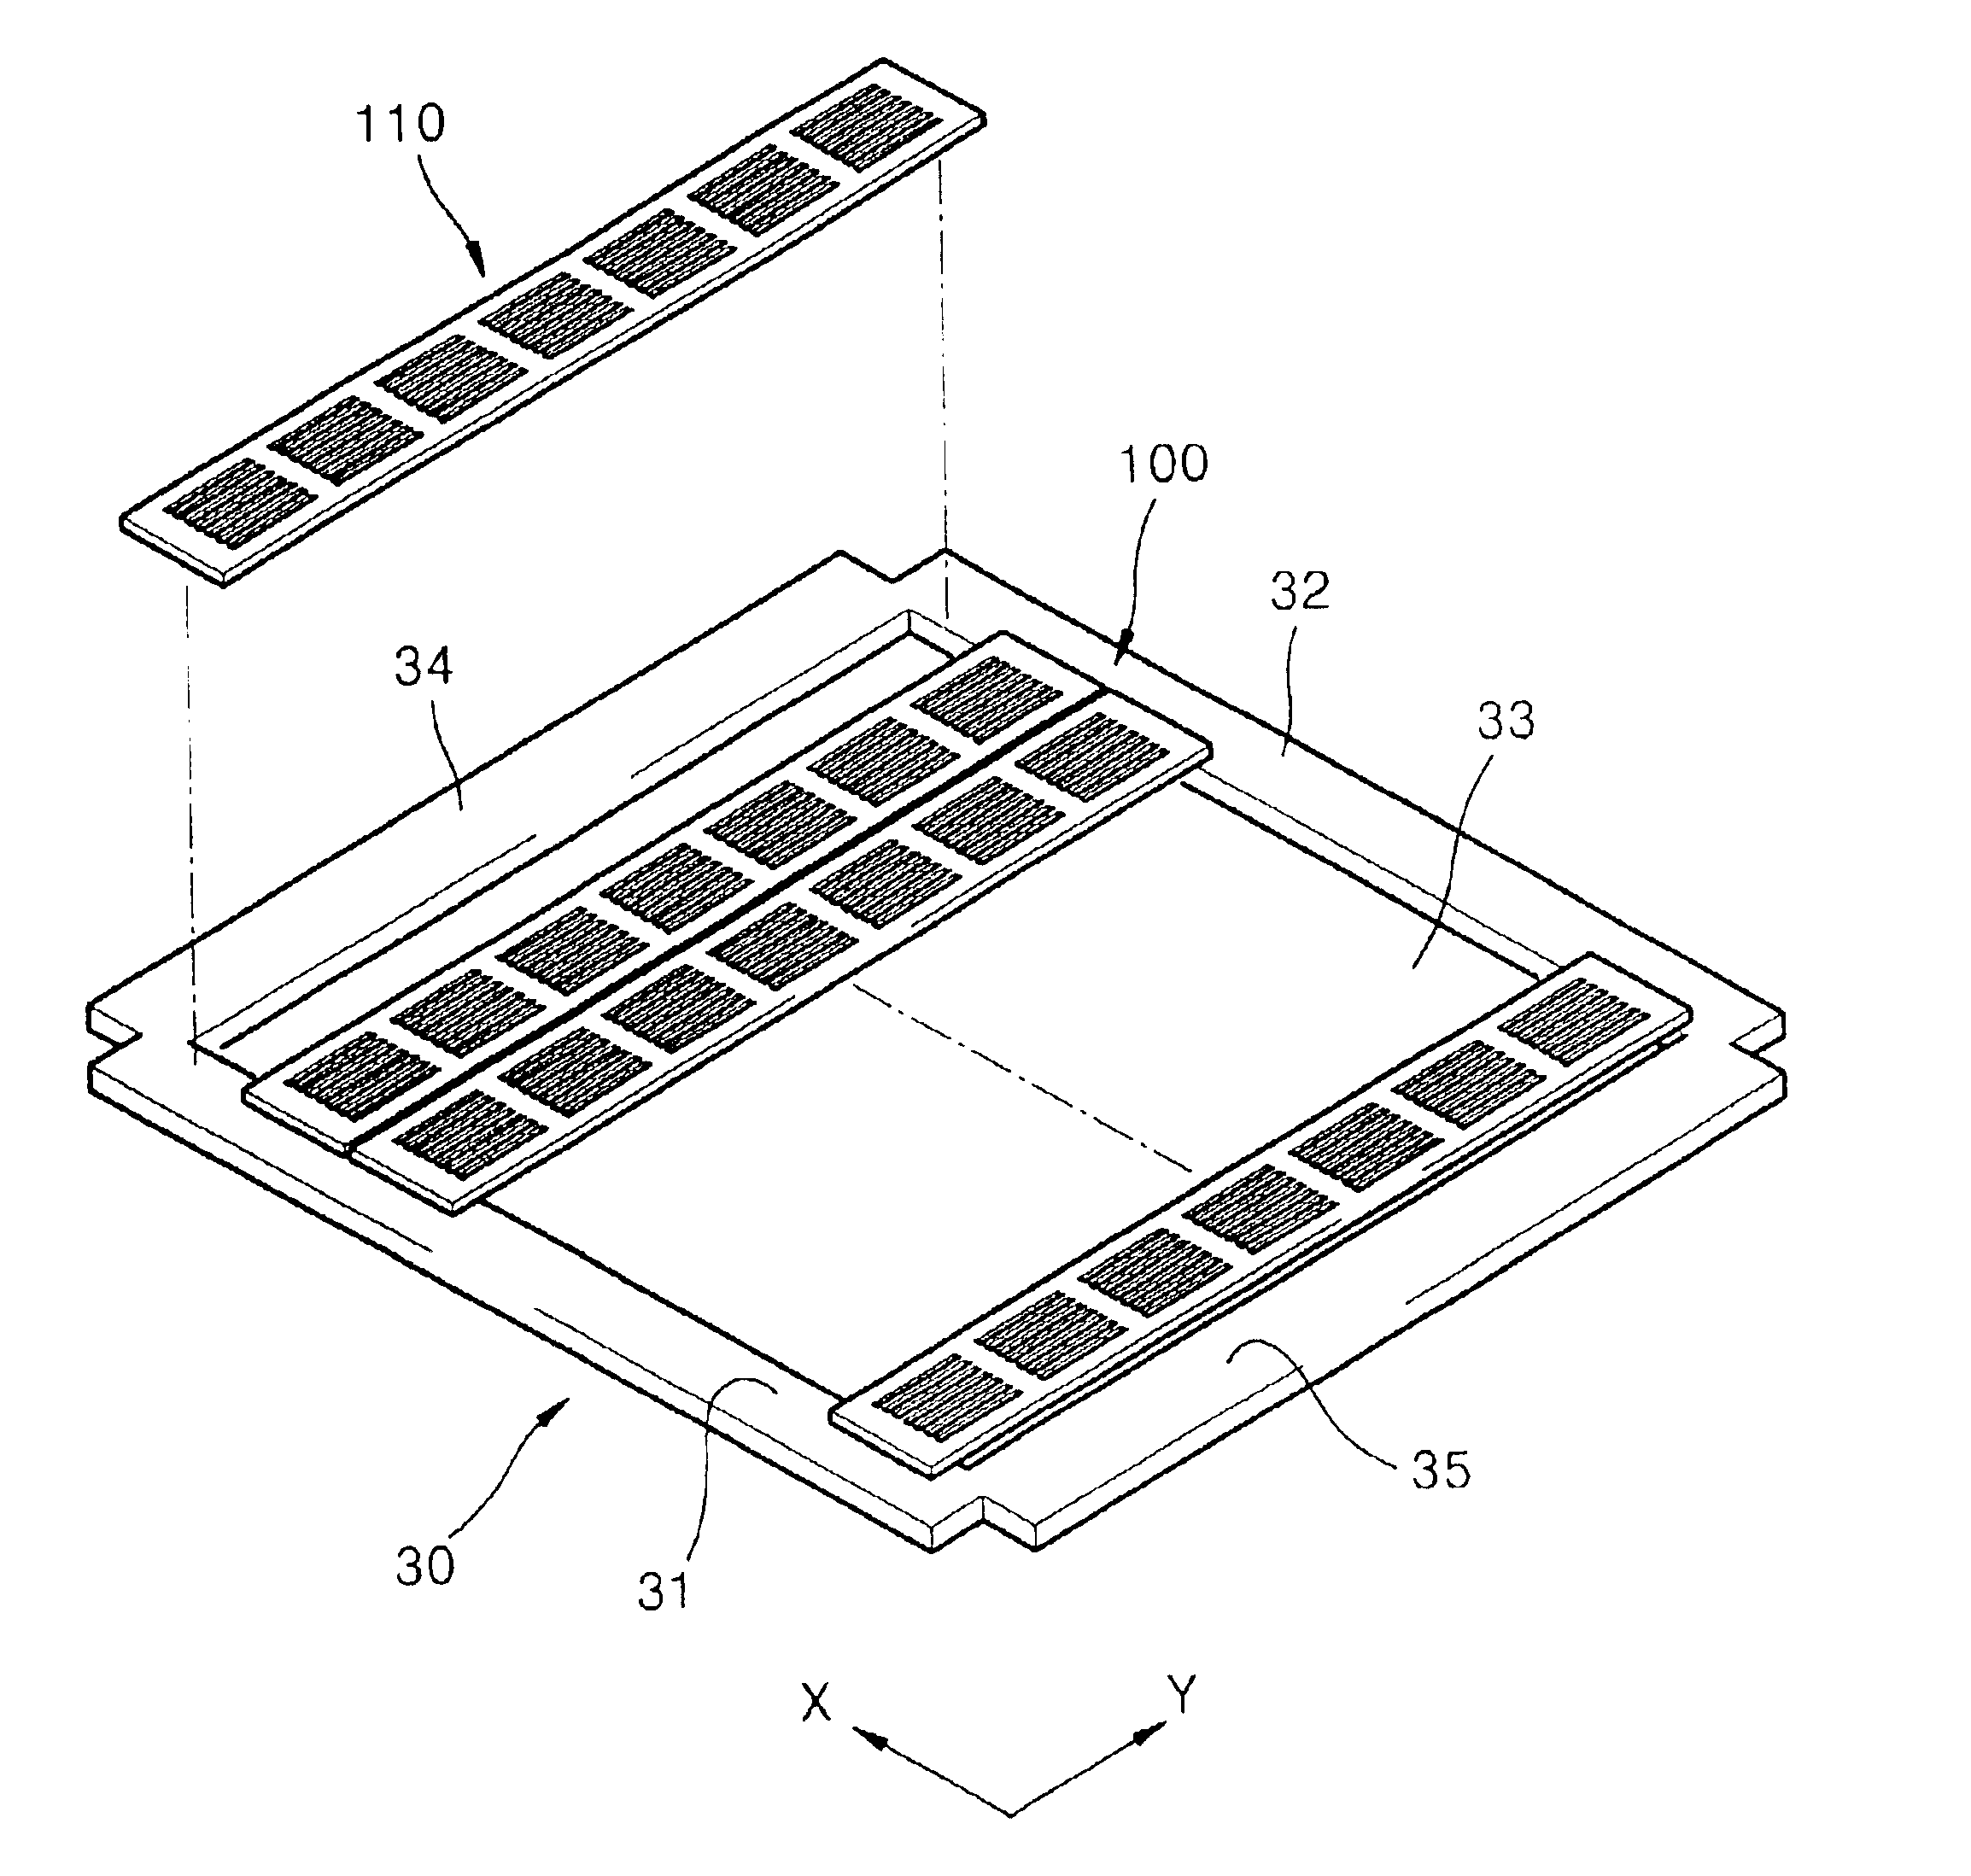 Tension mask assembly for use in vacuum deposition of thin film of organic electroluminescent device